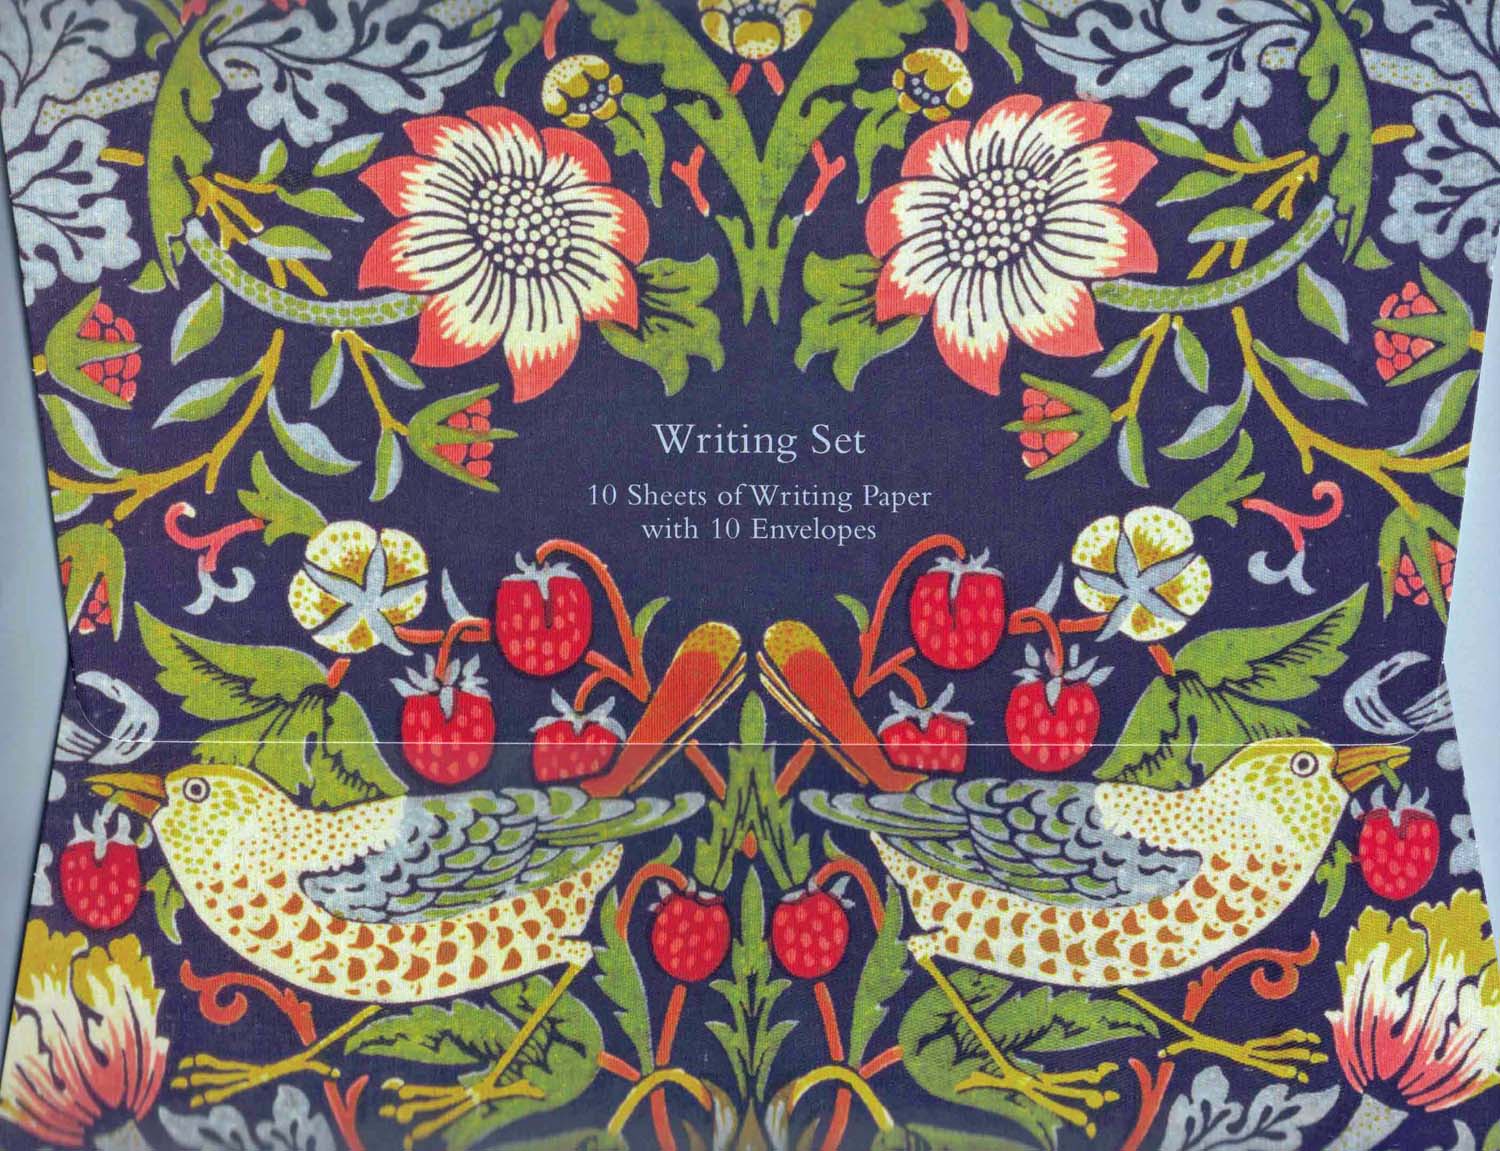 <p>Writing set of William Morris "Strawberry Thief" design (1883) containing 10 sheets of high quality A5 printed writing paper with 10 envelopes encased in an attractive matt laminate folder (7 3/8" x 9.5").</p>